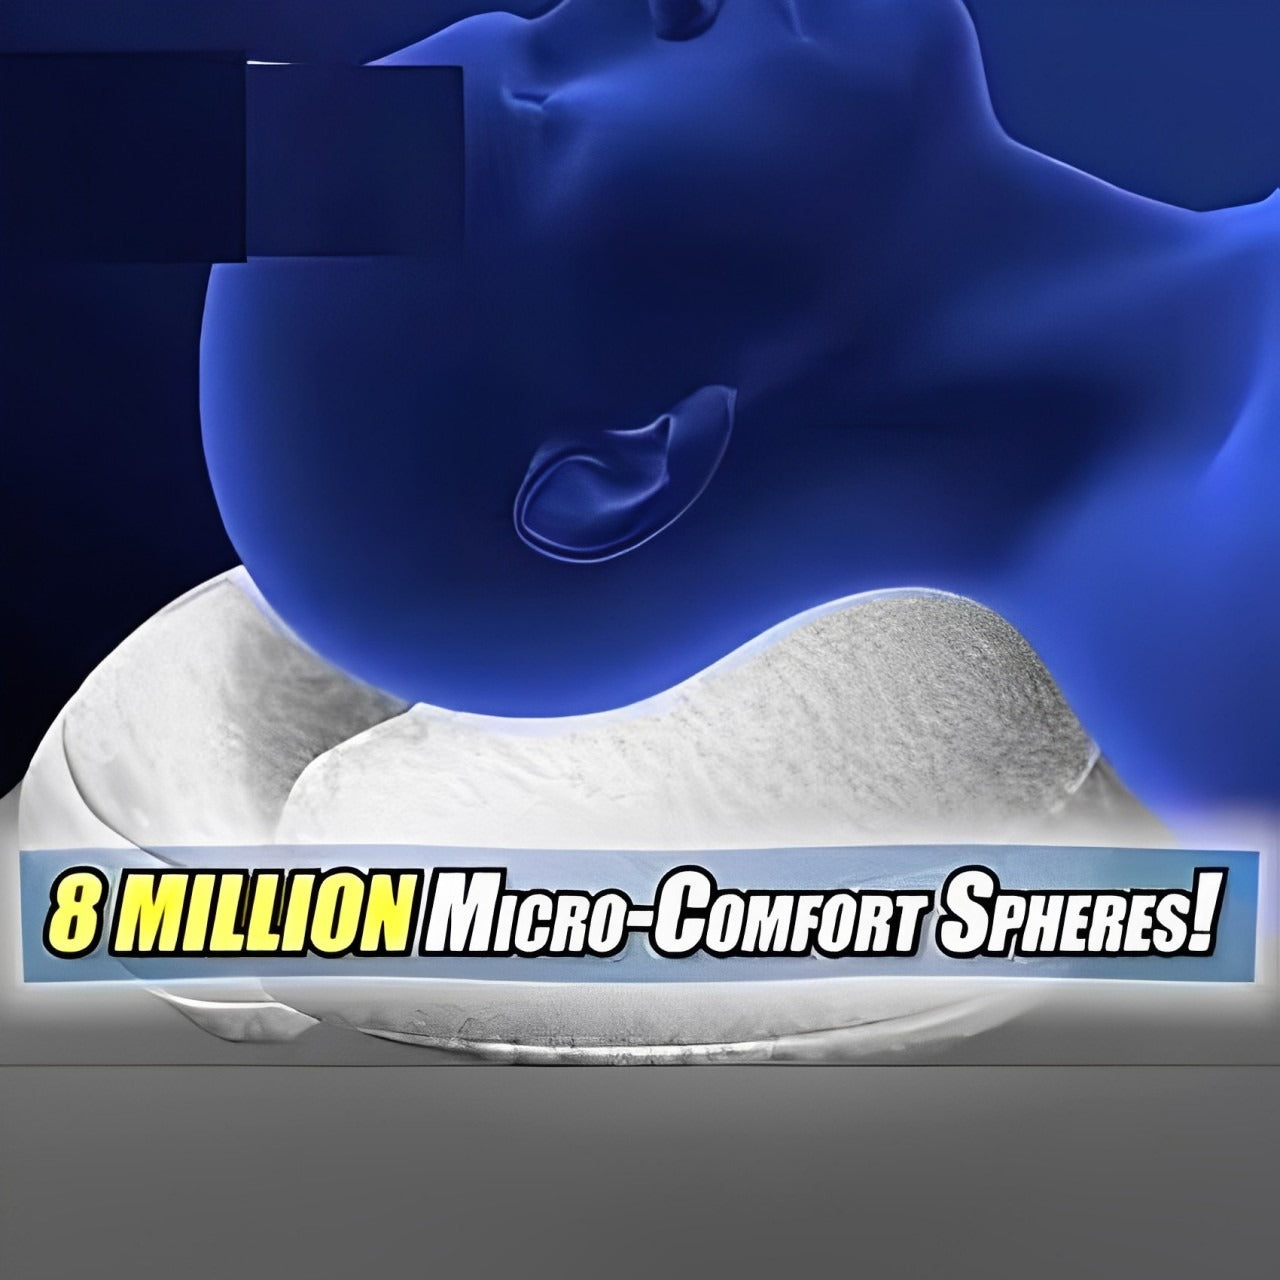 8 million micro-comfort spheres of cervical pillow for neck pain